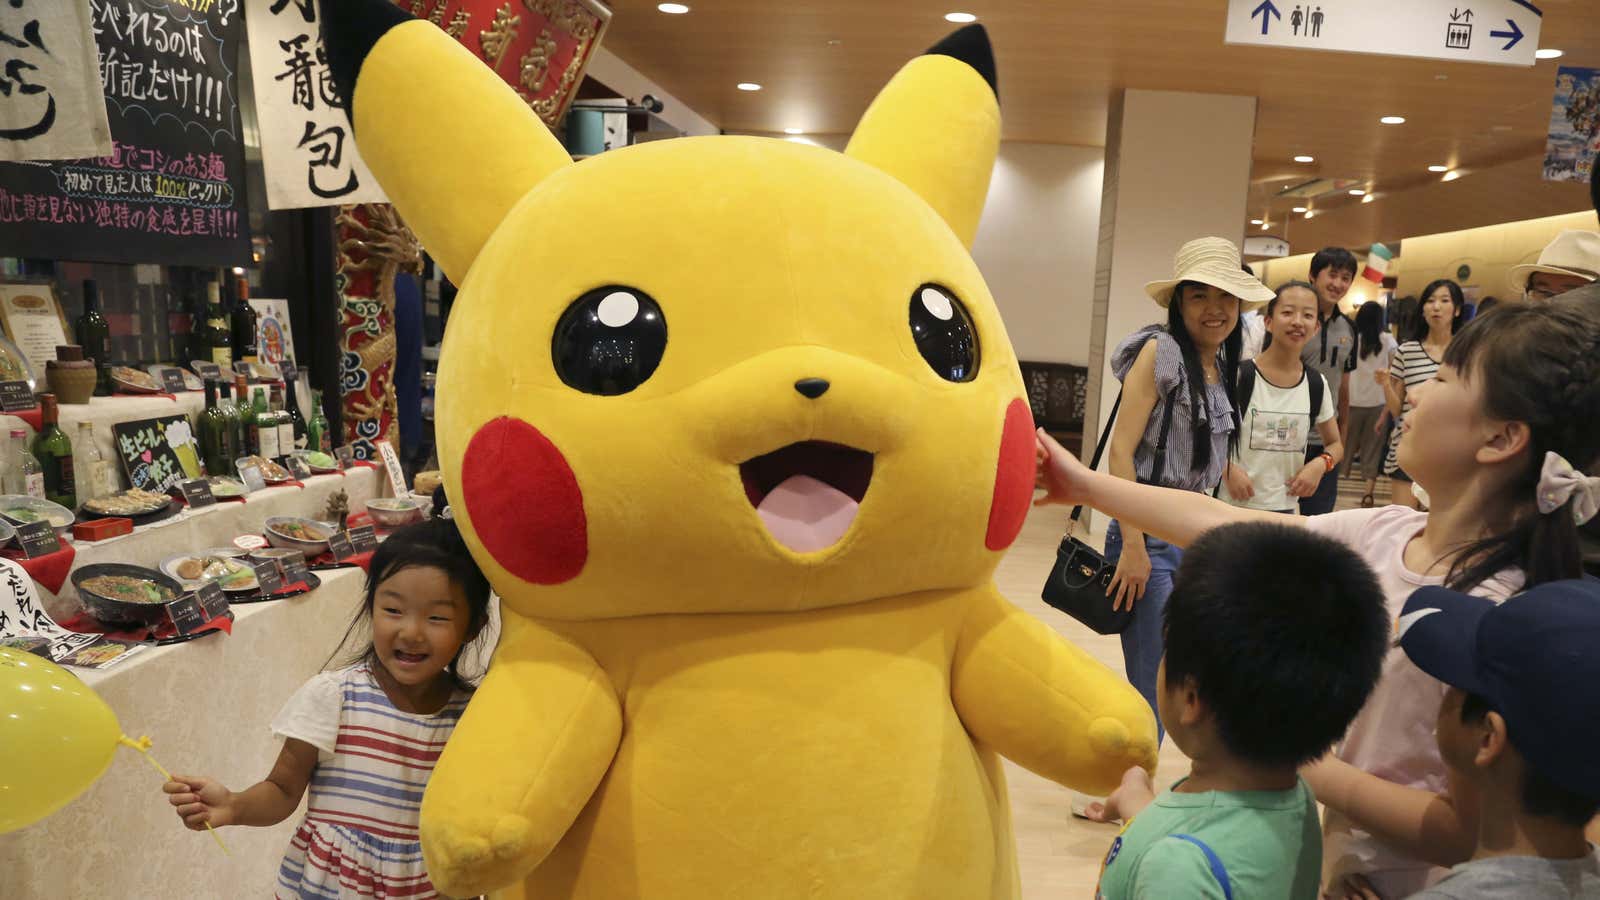 Yes, a Pokemon movie is happening—and it features “Detective Pikachu”